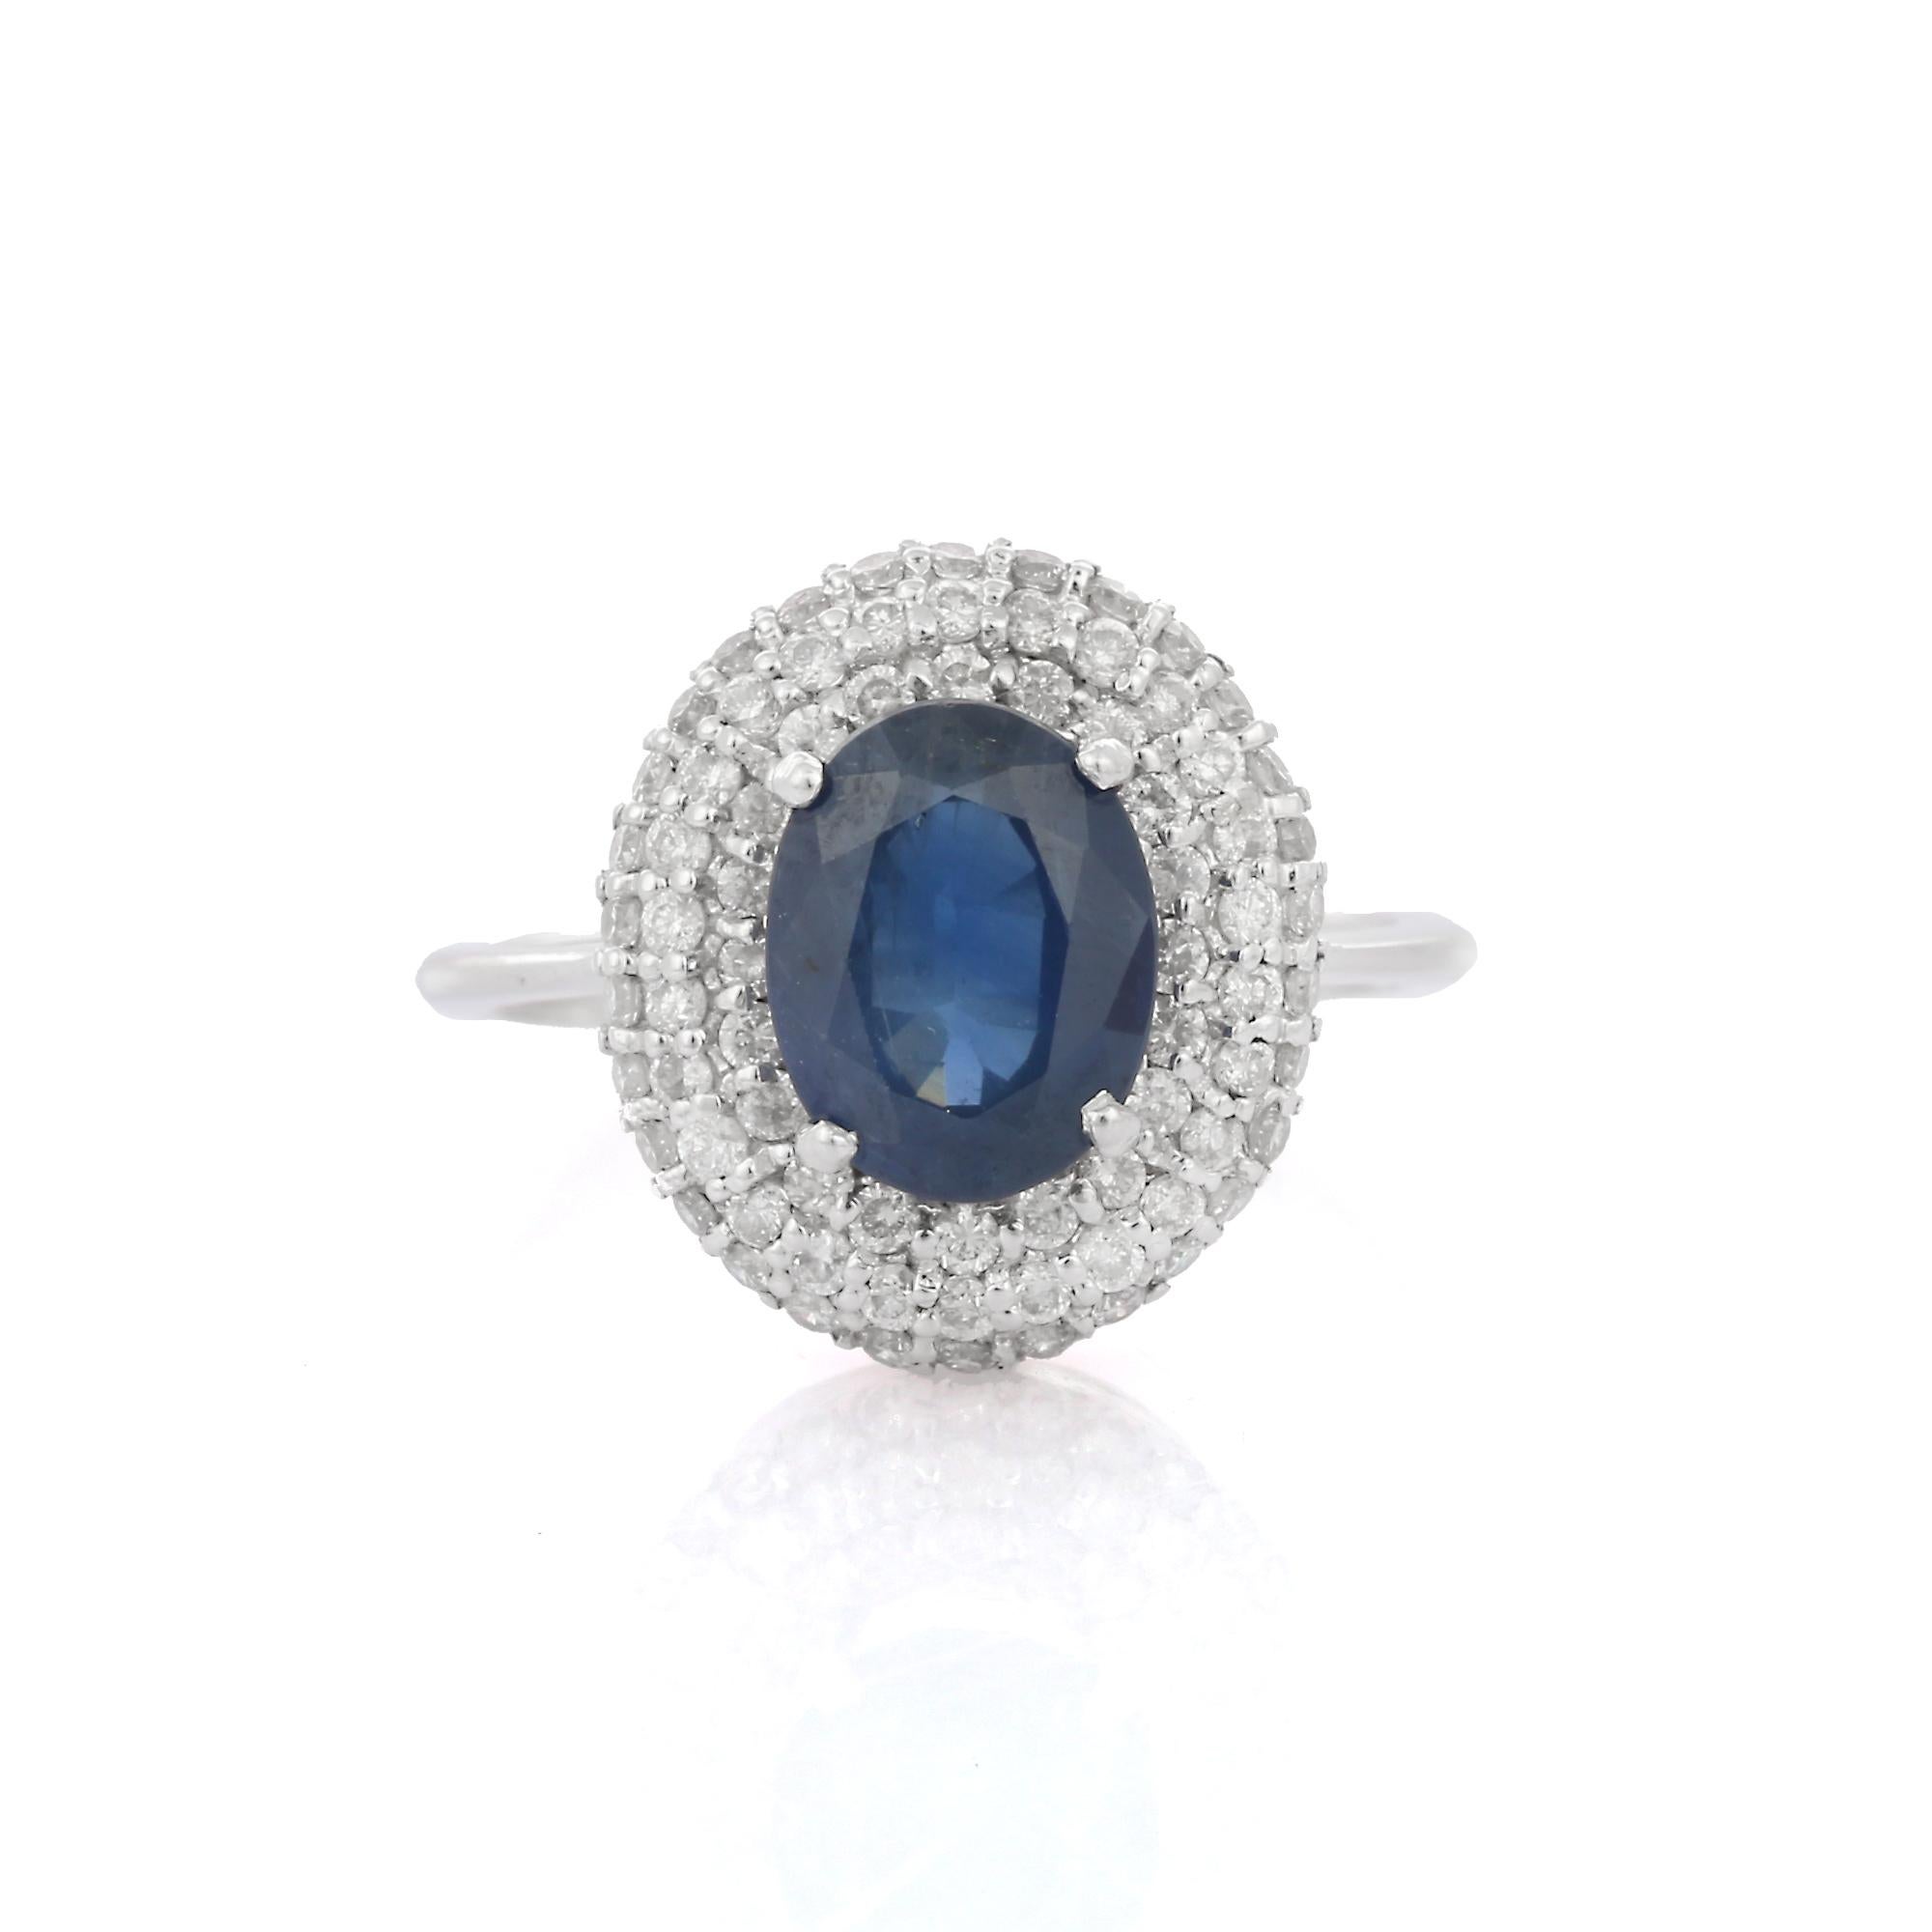 For Sale:  Blue Sapphire Diamond Big Round Cocktail Ring in 18K White Gold 3